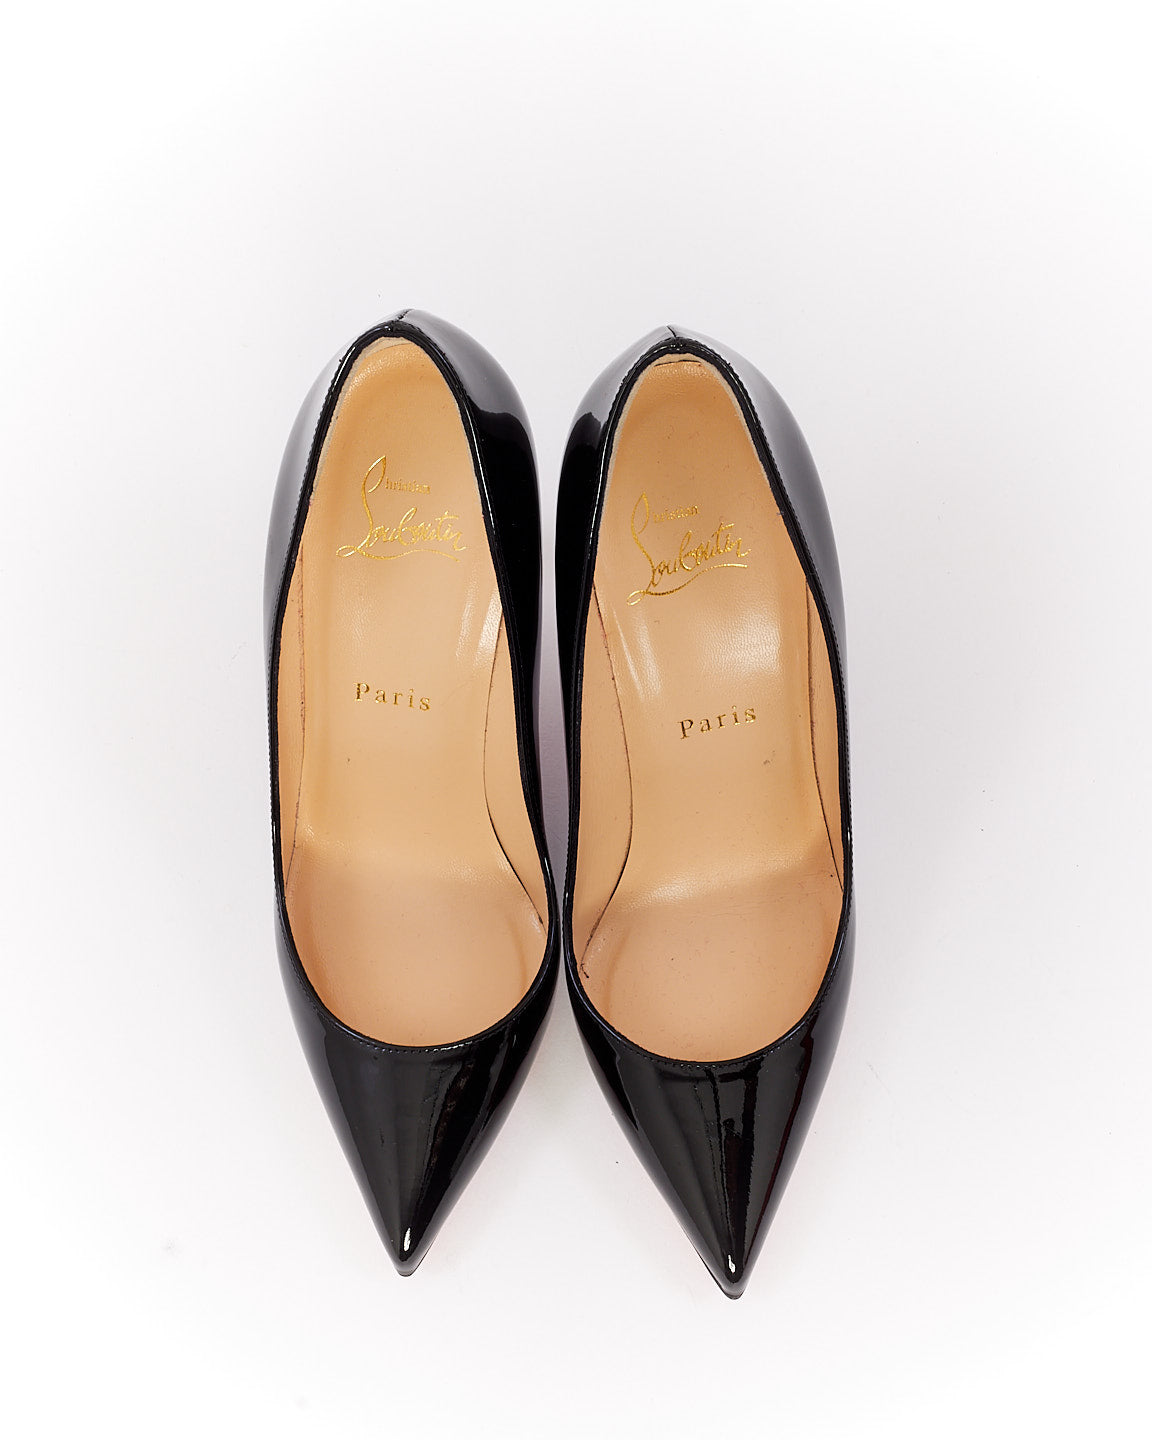 Christian Louboutin Black Patent Leather Pigalle 100mm Pumps - 37